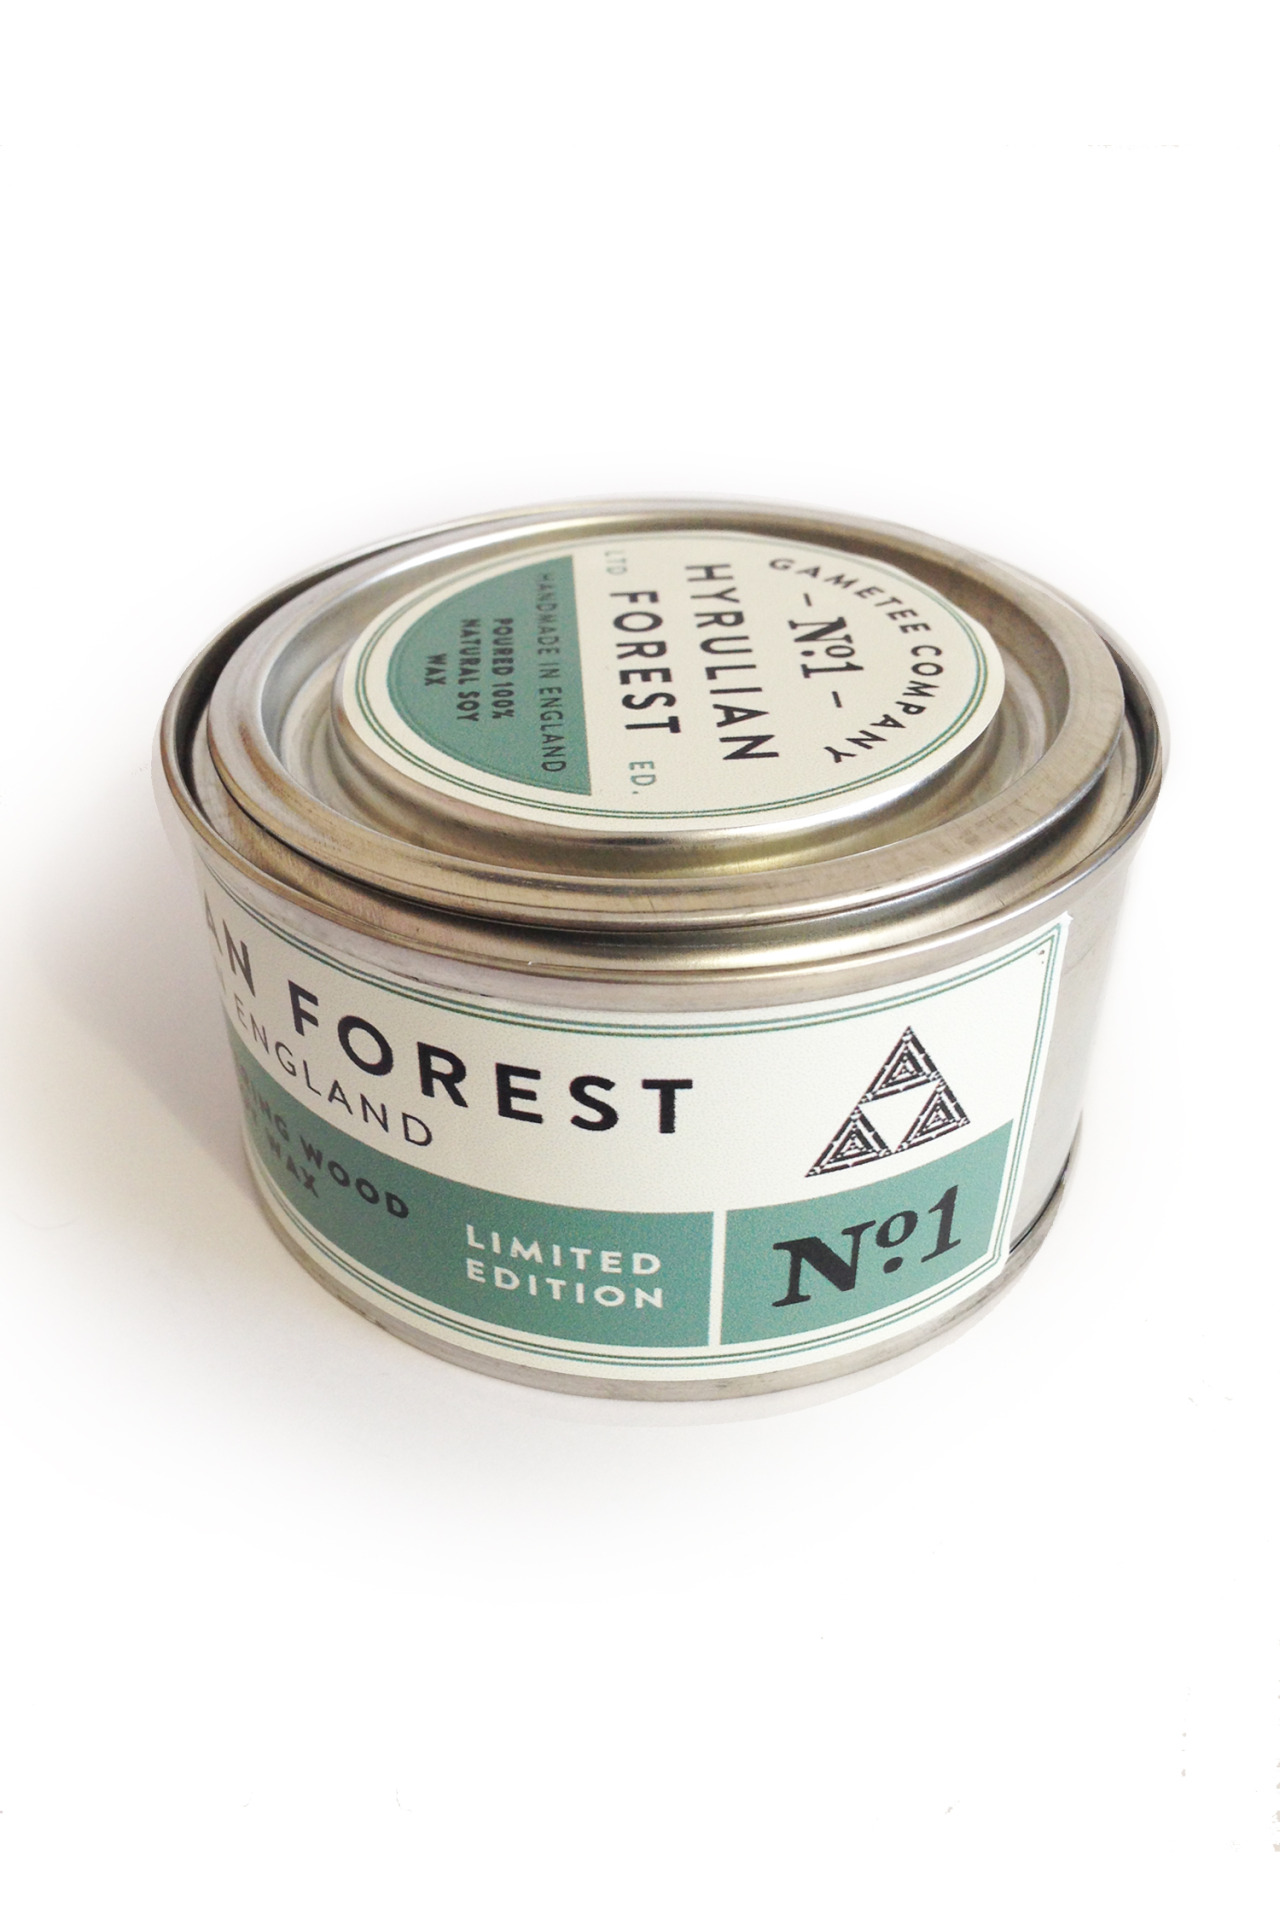 it8bit:  Gaming-inspired Candles from GameteeNo.1 - Hyrulian Forest - Inspired by